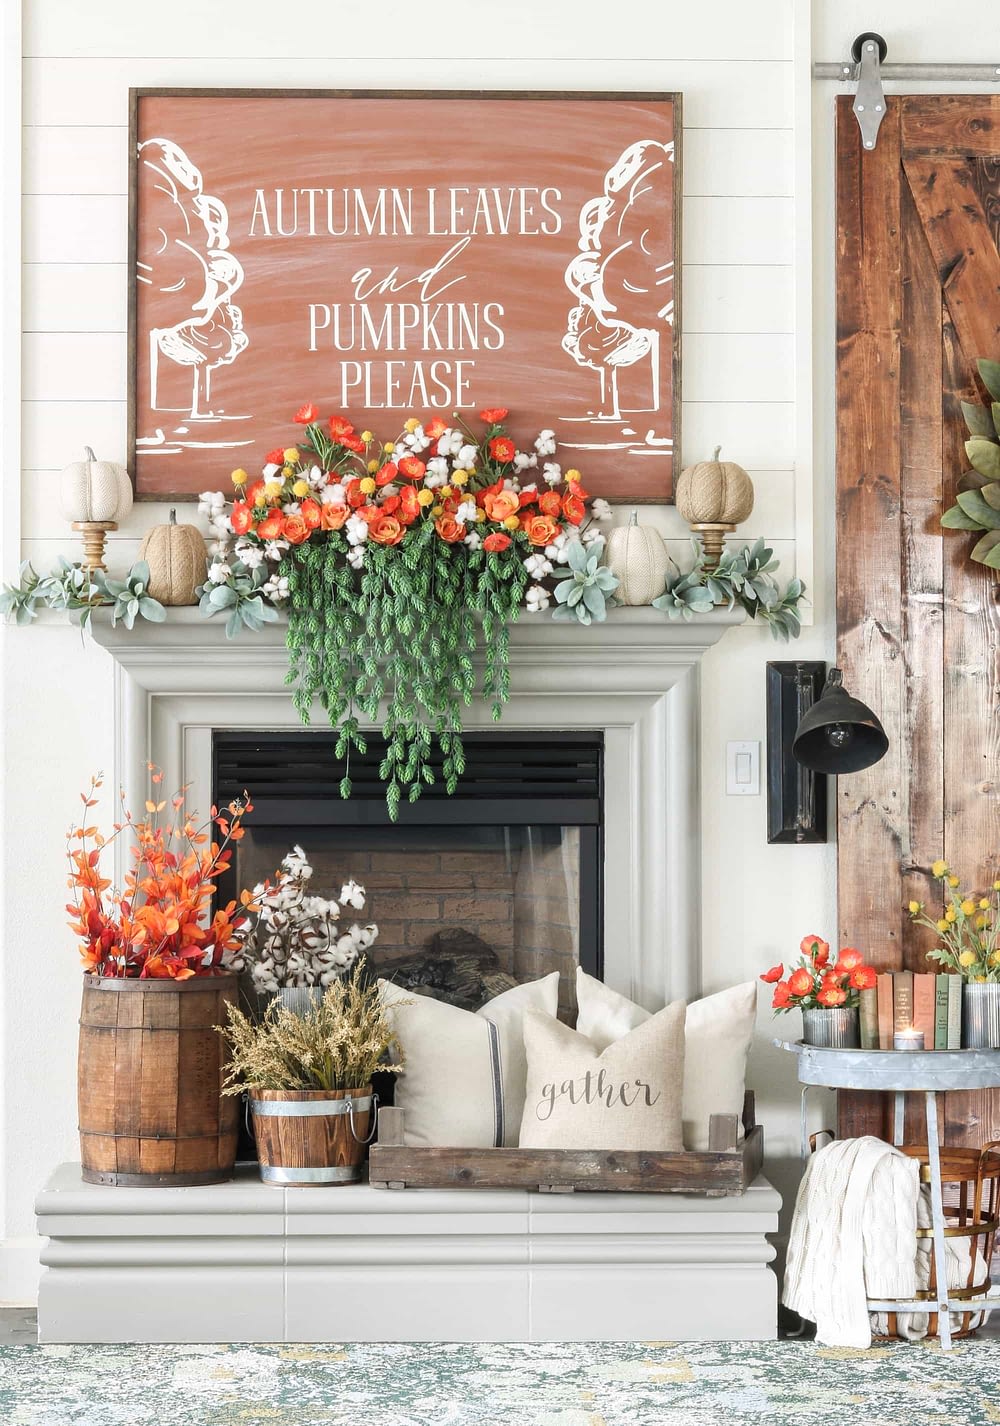 Fall mantel ideas using orange florals, wooden barrels, and cozy pillows centered under a giant piece of artwork